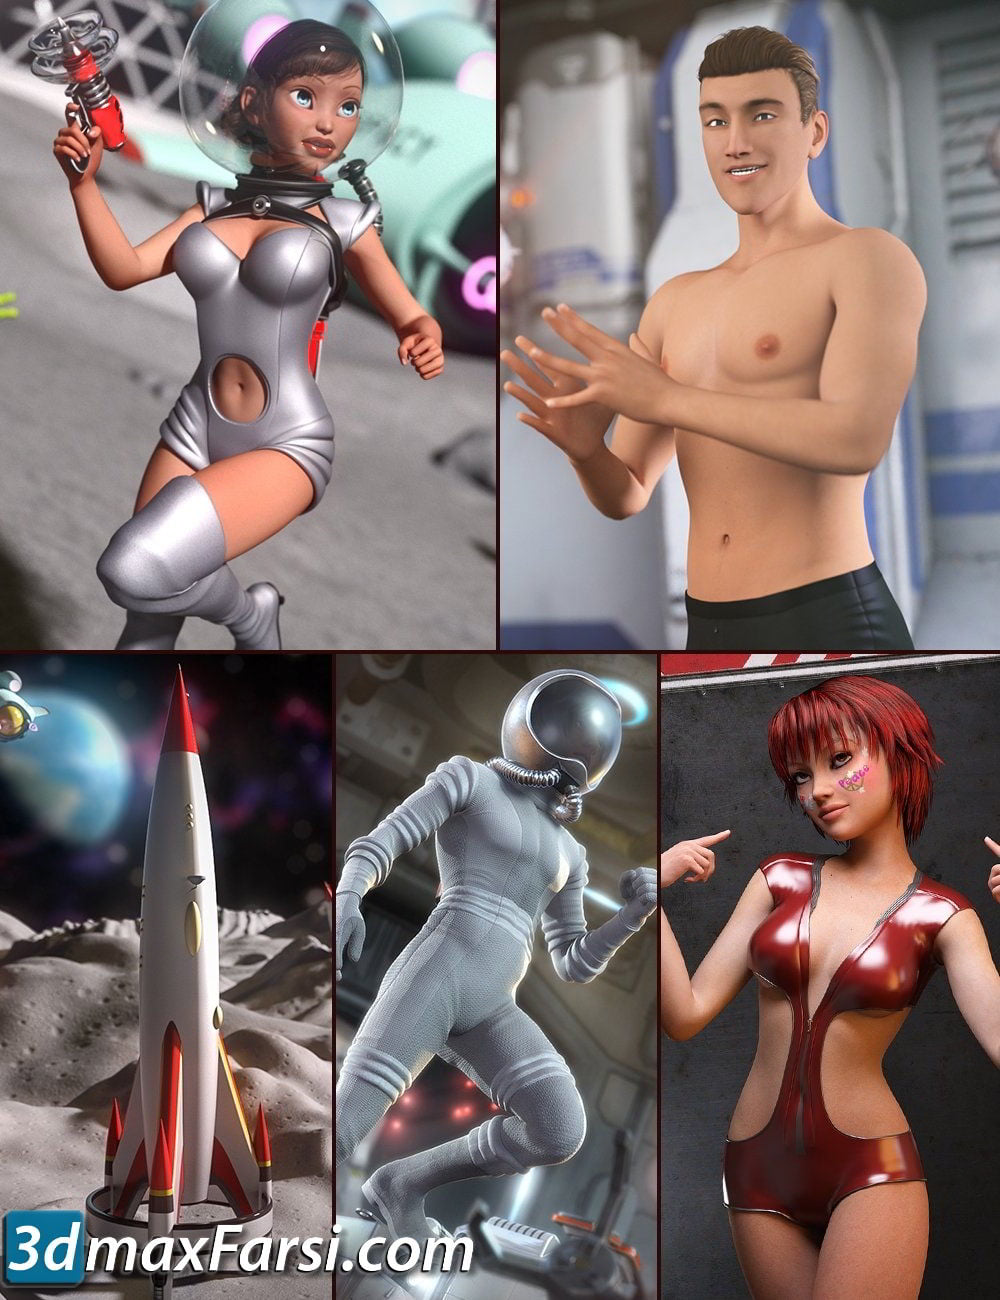 Daz3d, Callie & Cory In Space free download